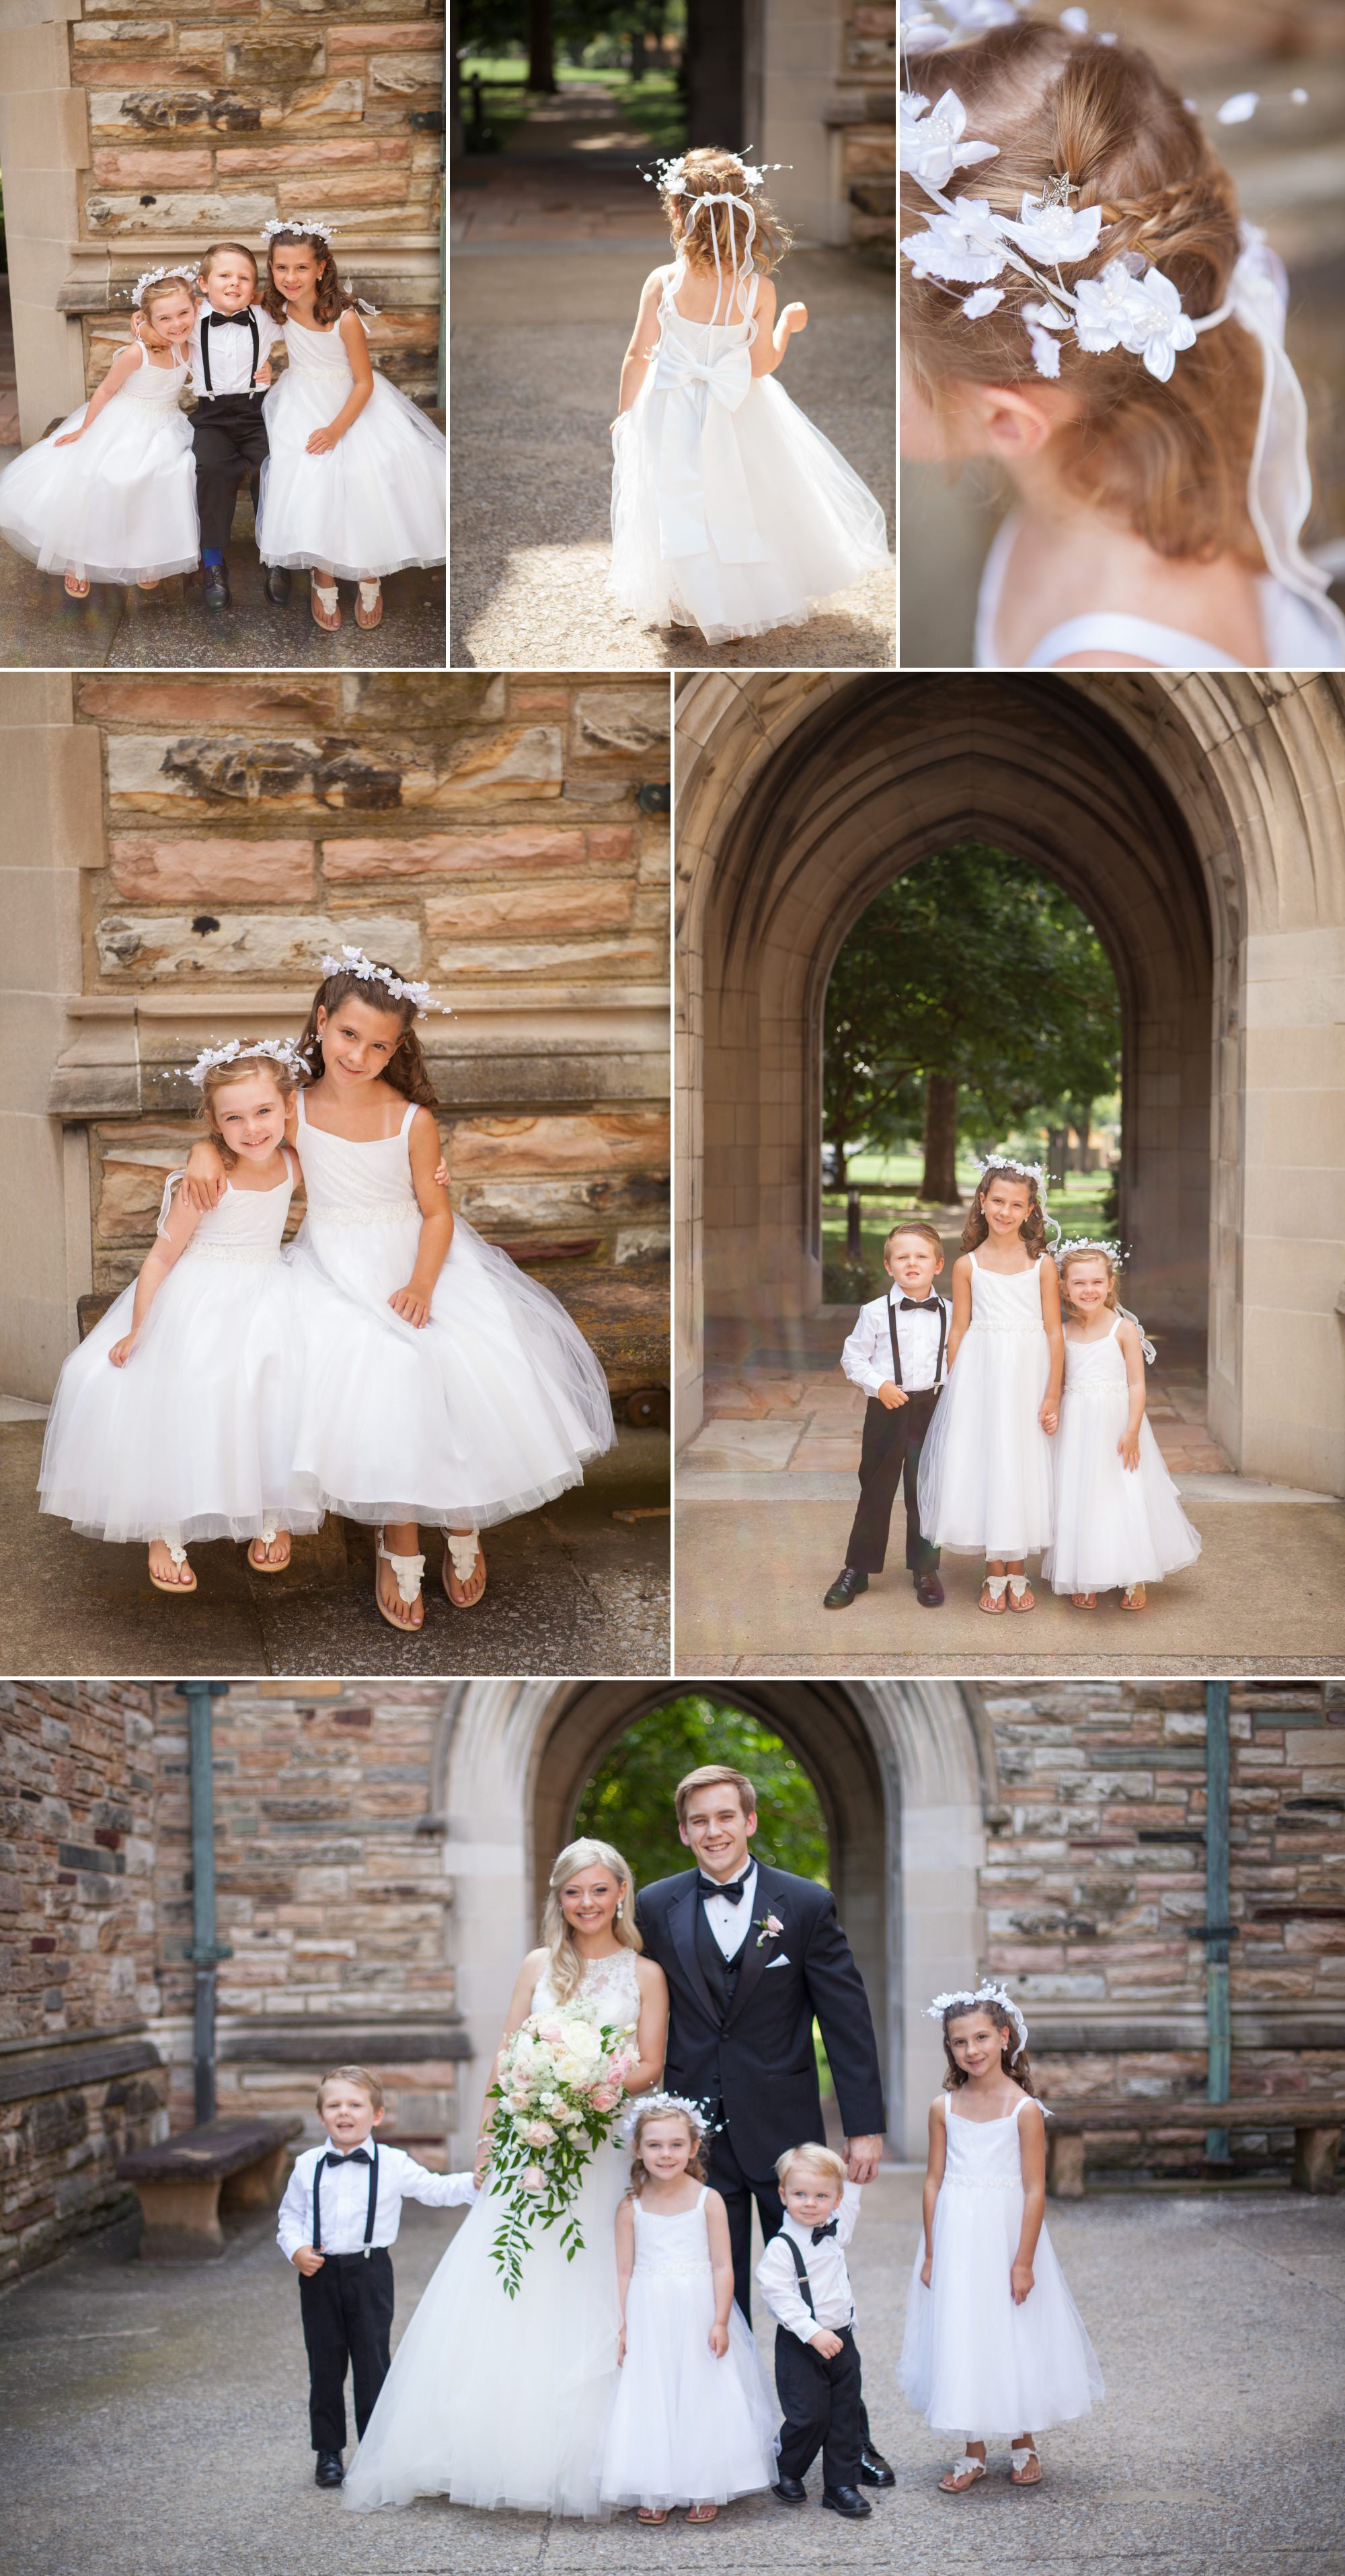 Adorable flower girls and ring bearer outdoors - Wightman Chapel at Scarritt Bennett before summer wedding ceremony in Nashville, TN. Photography by Krista Lee Photography.